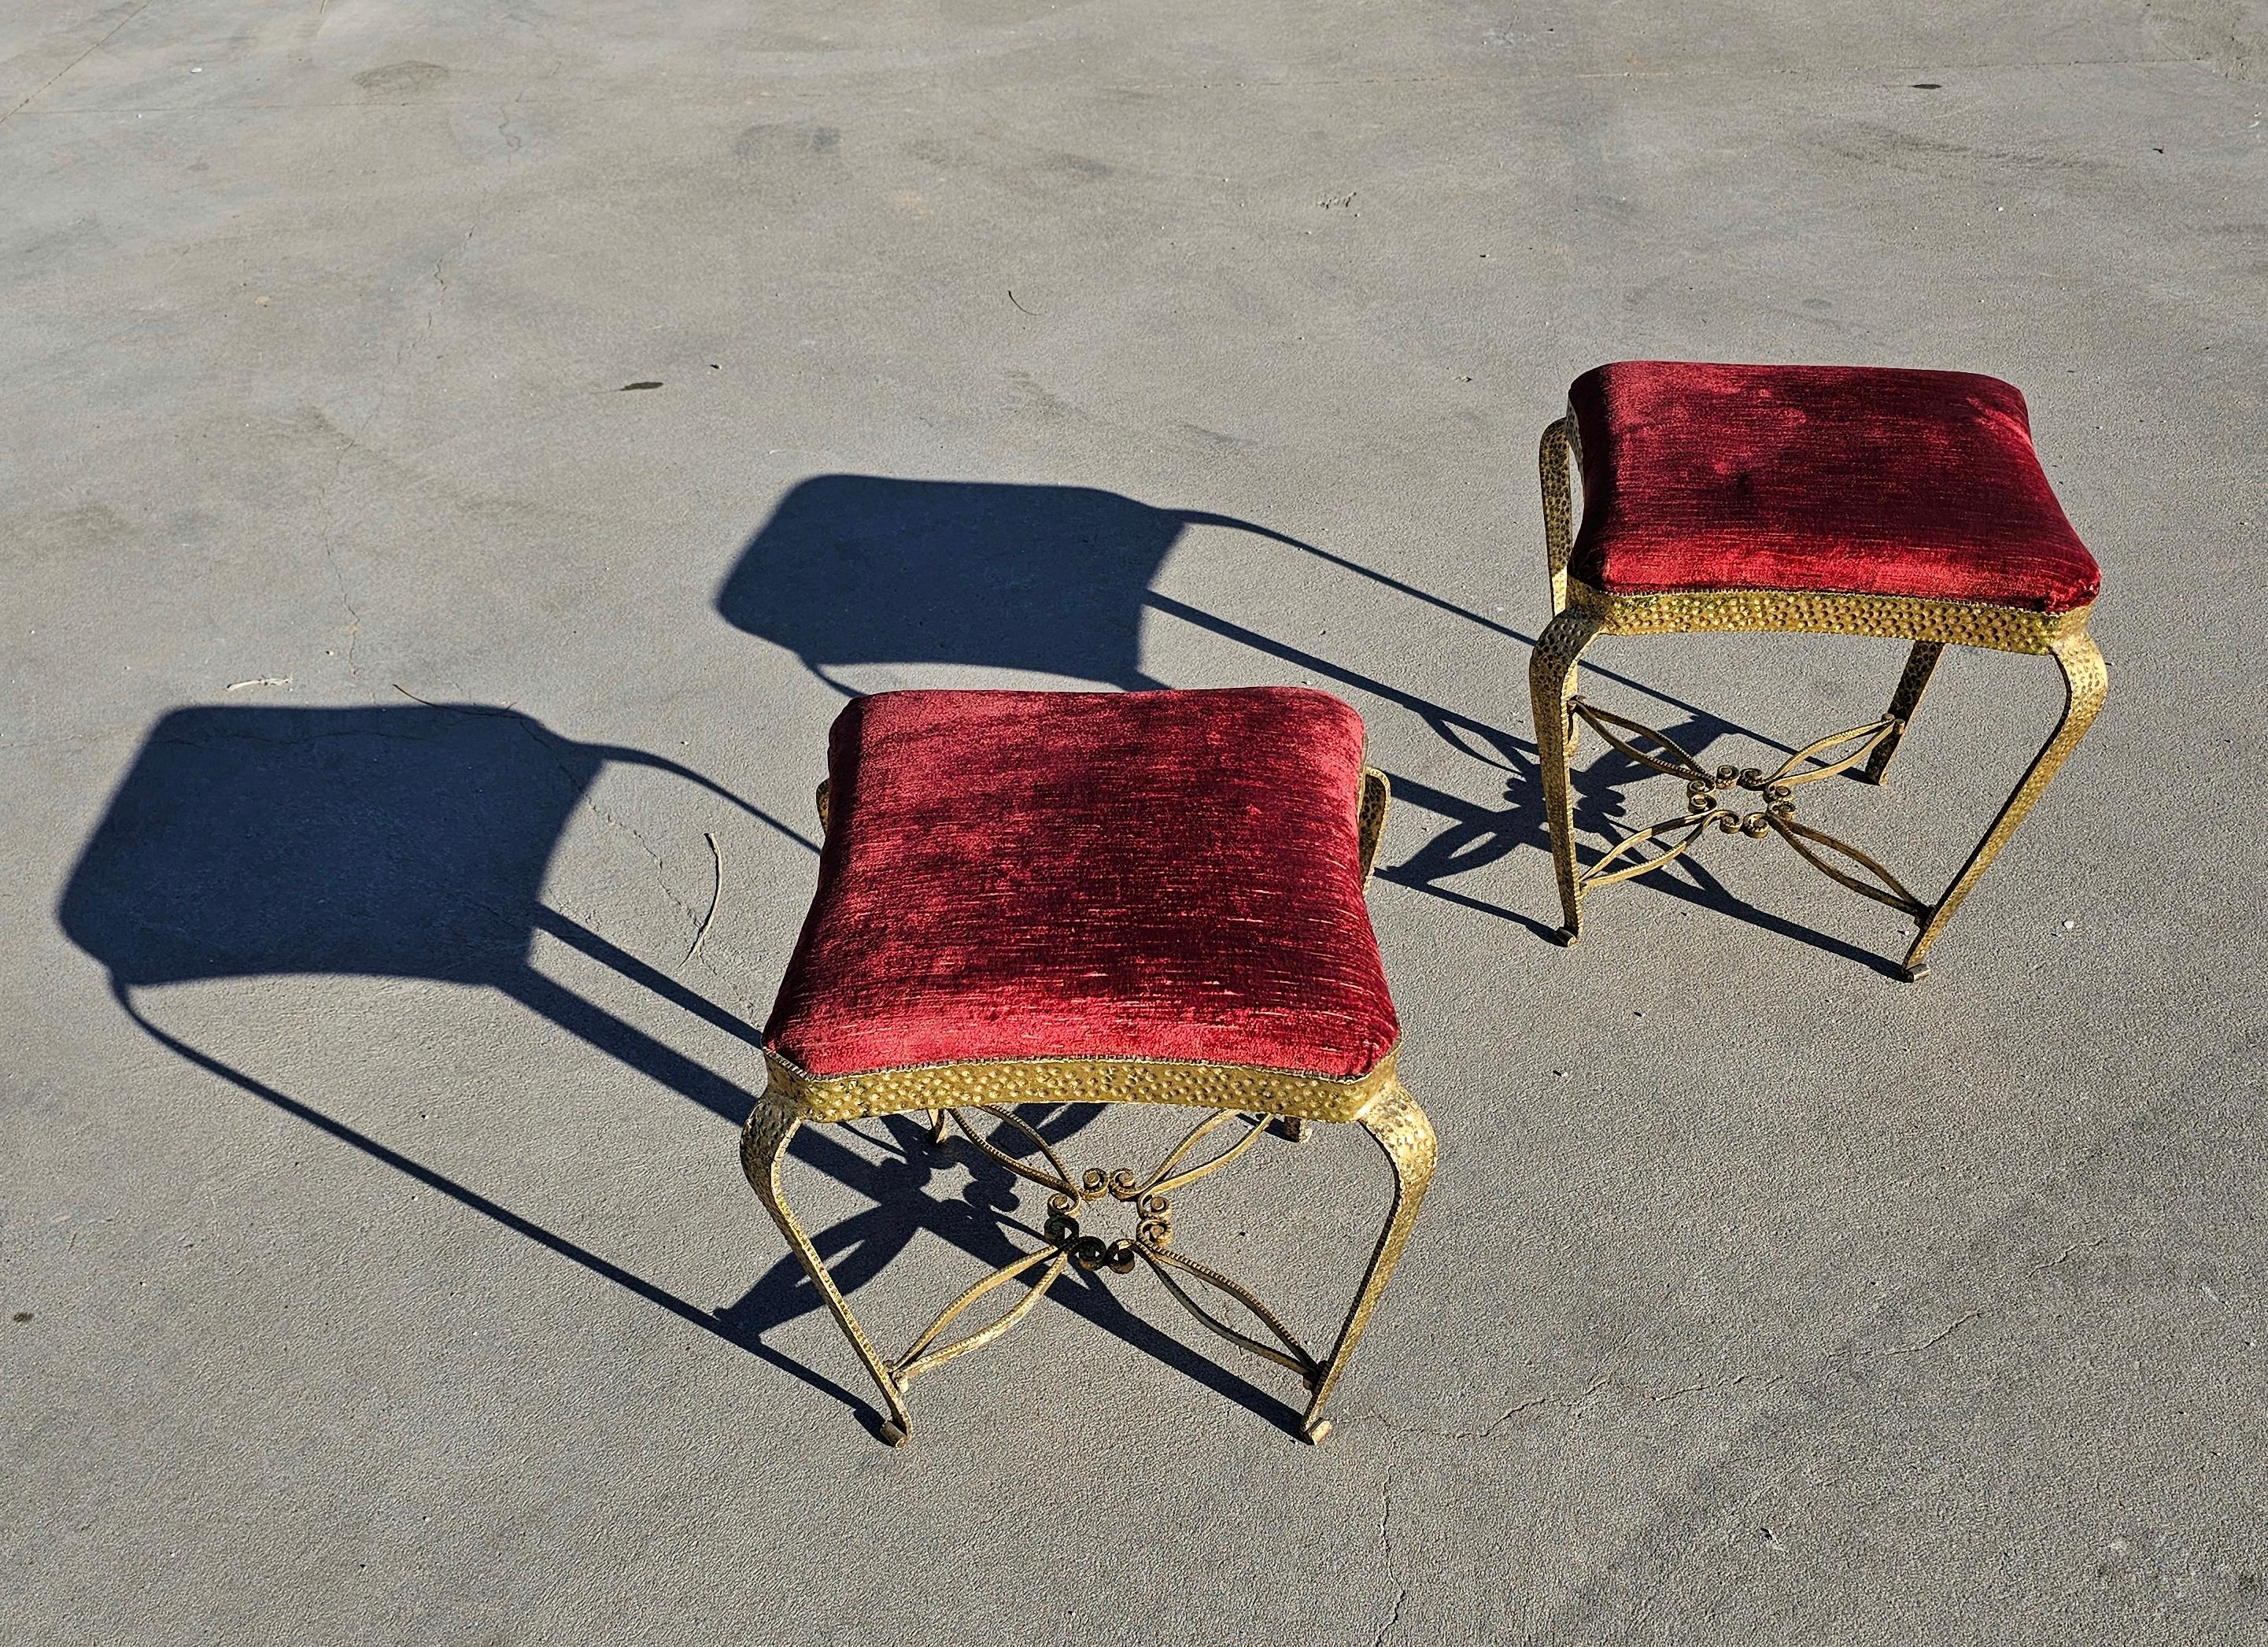 In this listing you will find a stunning pair of Italian Mid-Century Modern hand-hammered and gilt iron benches / stools / poufs / ottomans by Pier Luigi Colli. The pieces show a bold form united by a star form stretcher. All work is hand done and